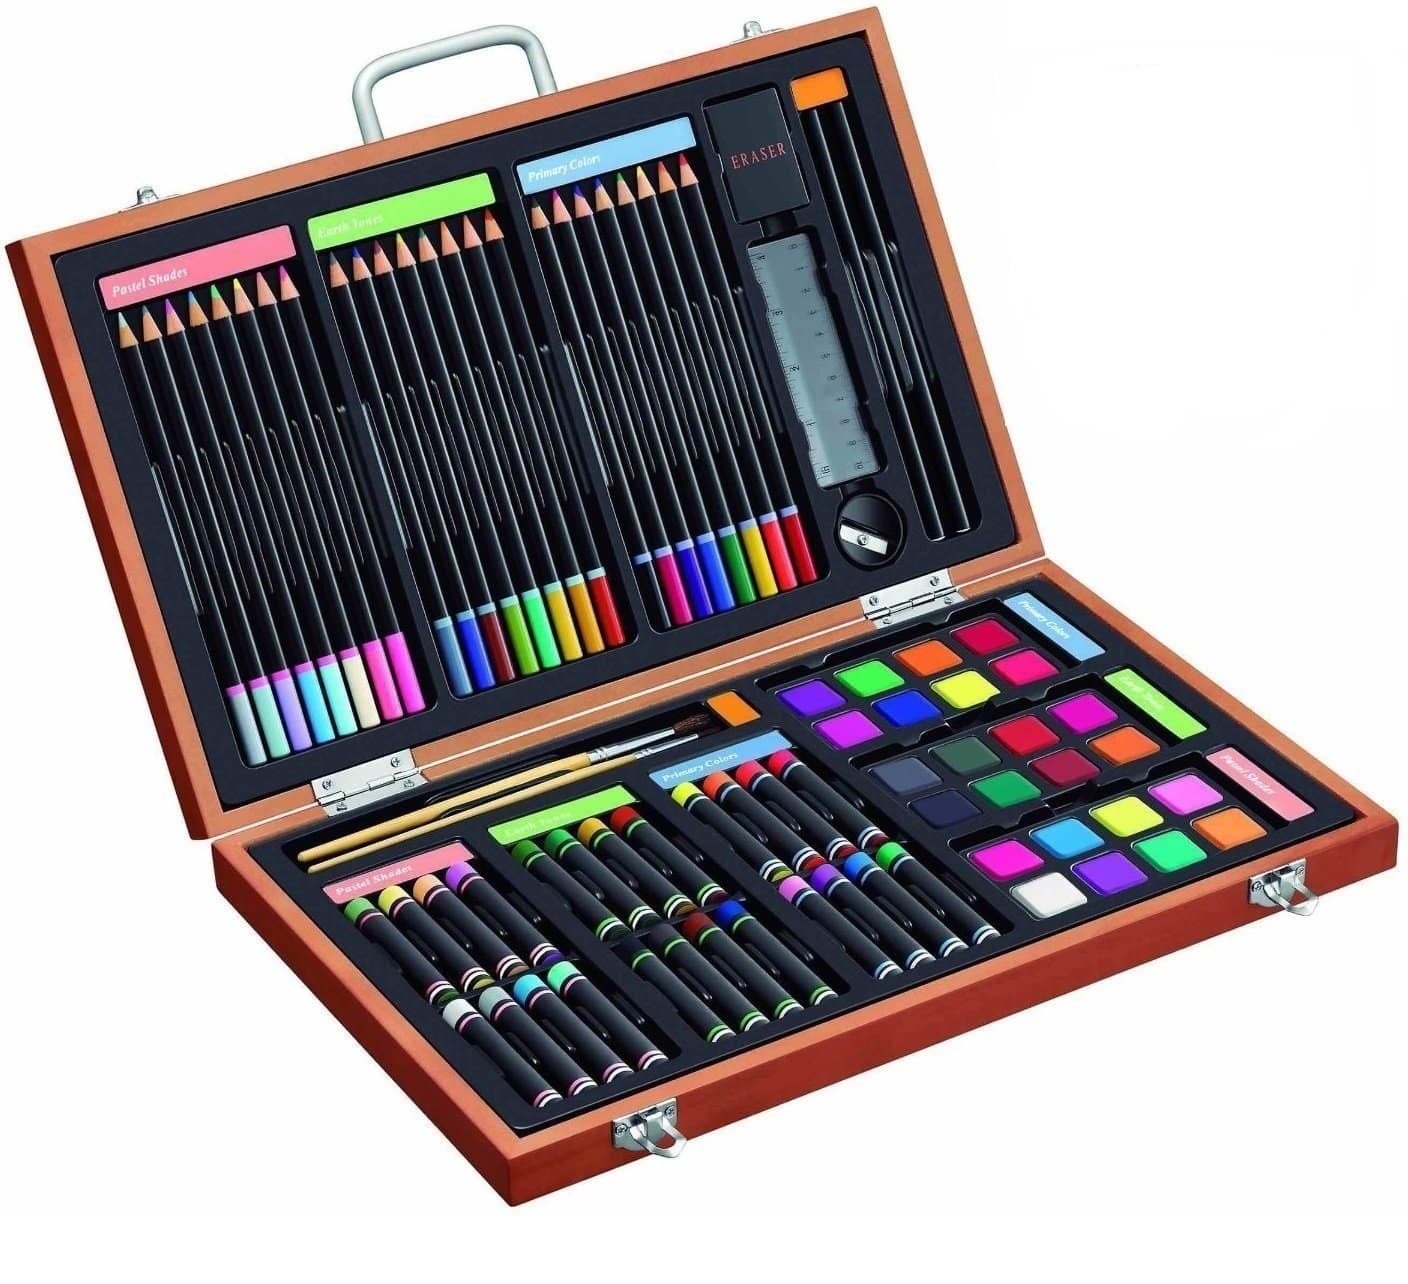 Top 10 Best Finest Art Sets in 2022 TopTenTheBest